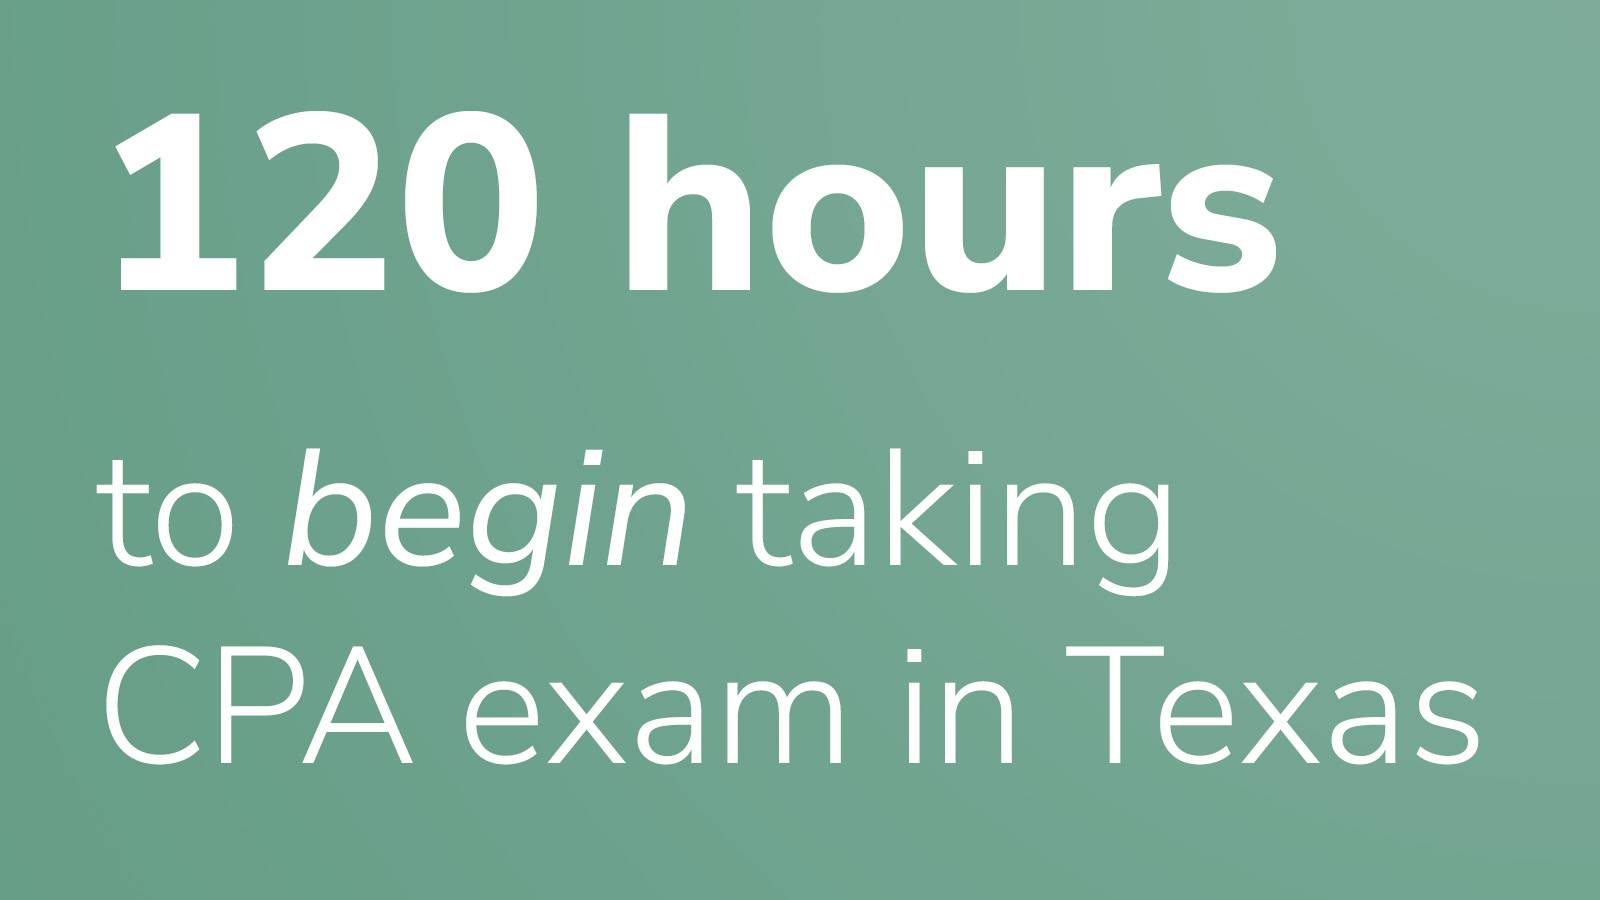 Teal graphic with white text that reads, "One hundred twenty hours to begin taking CPA exam in Texas"